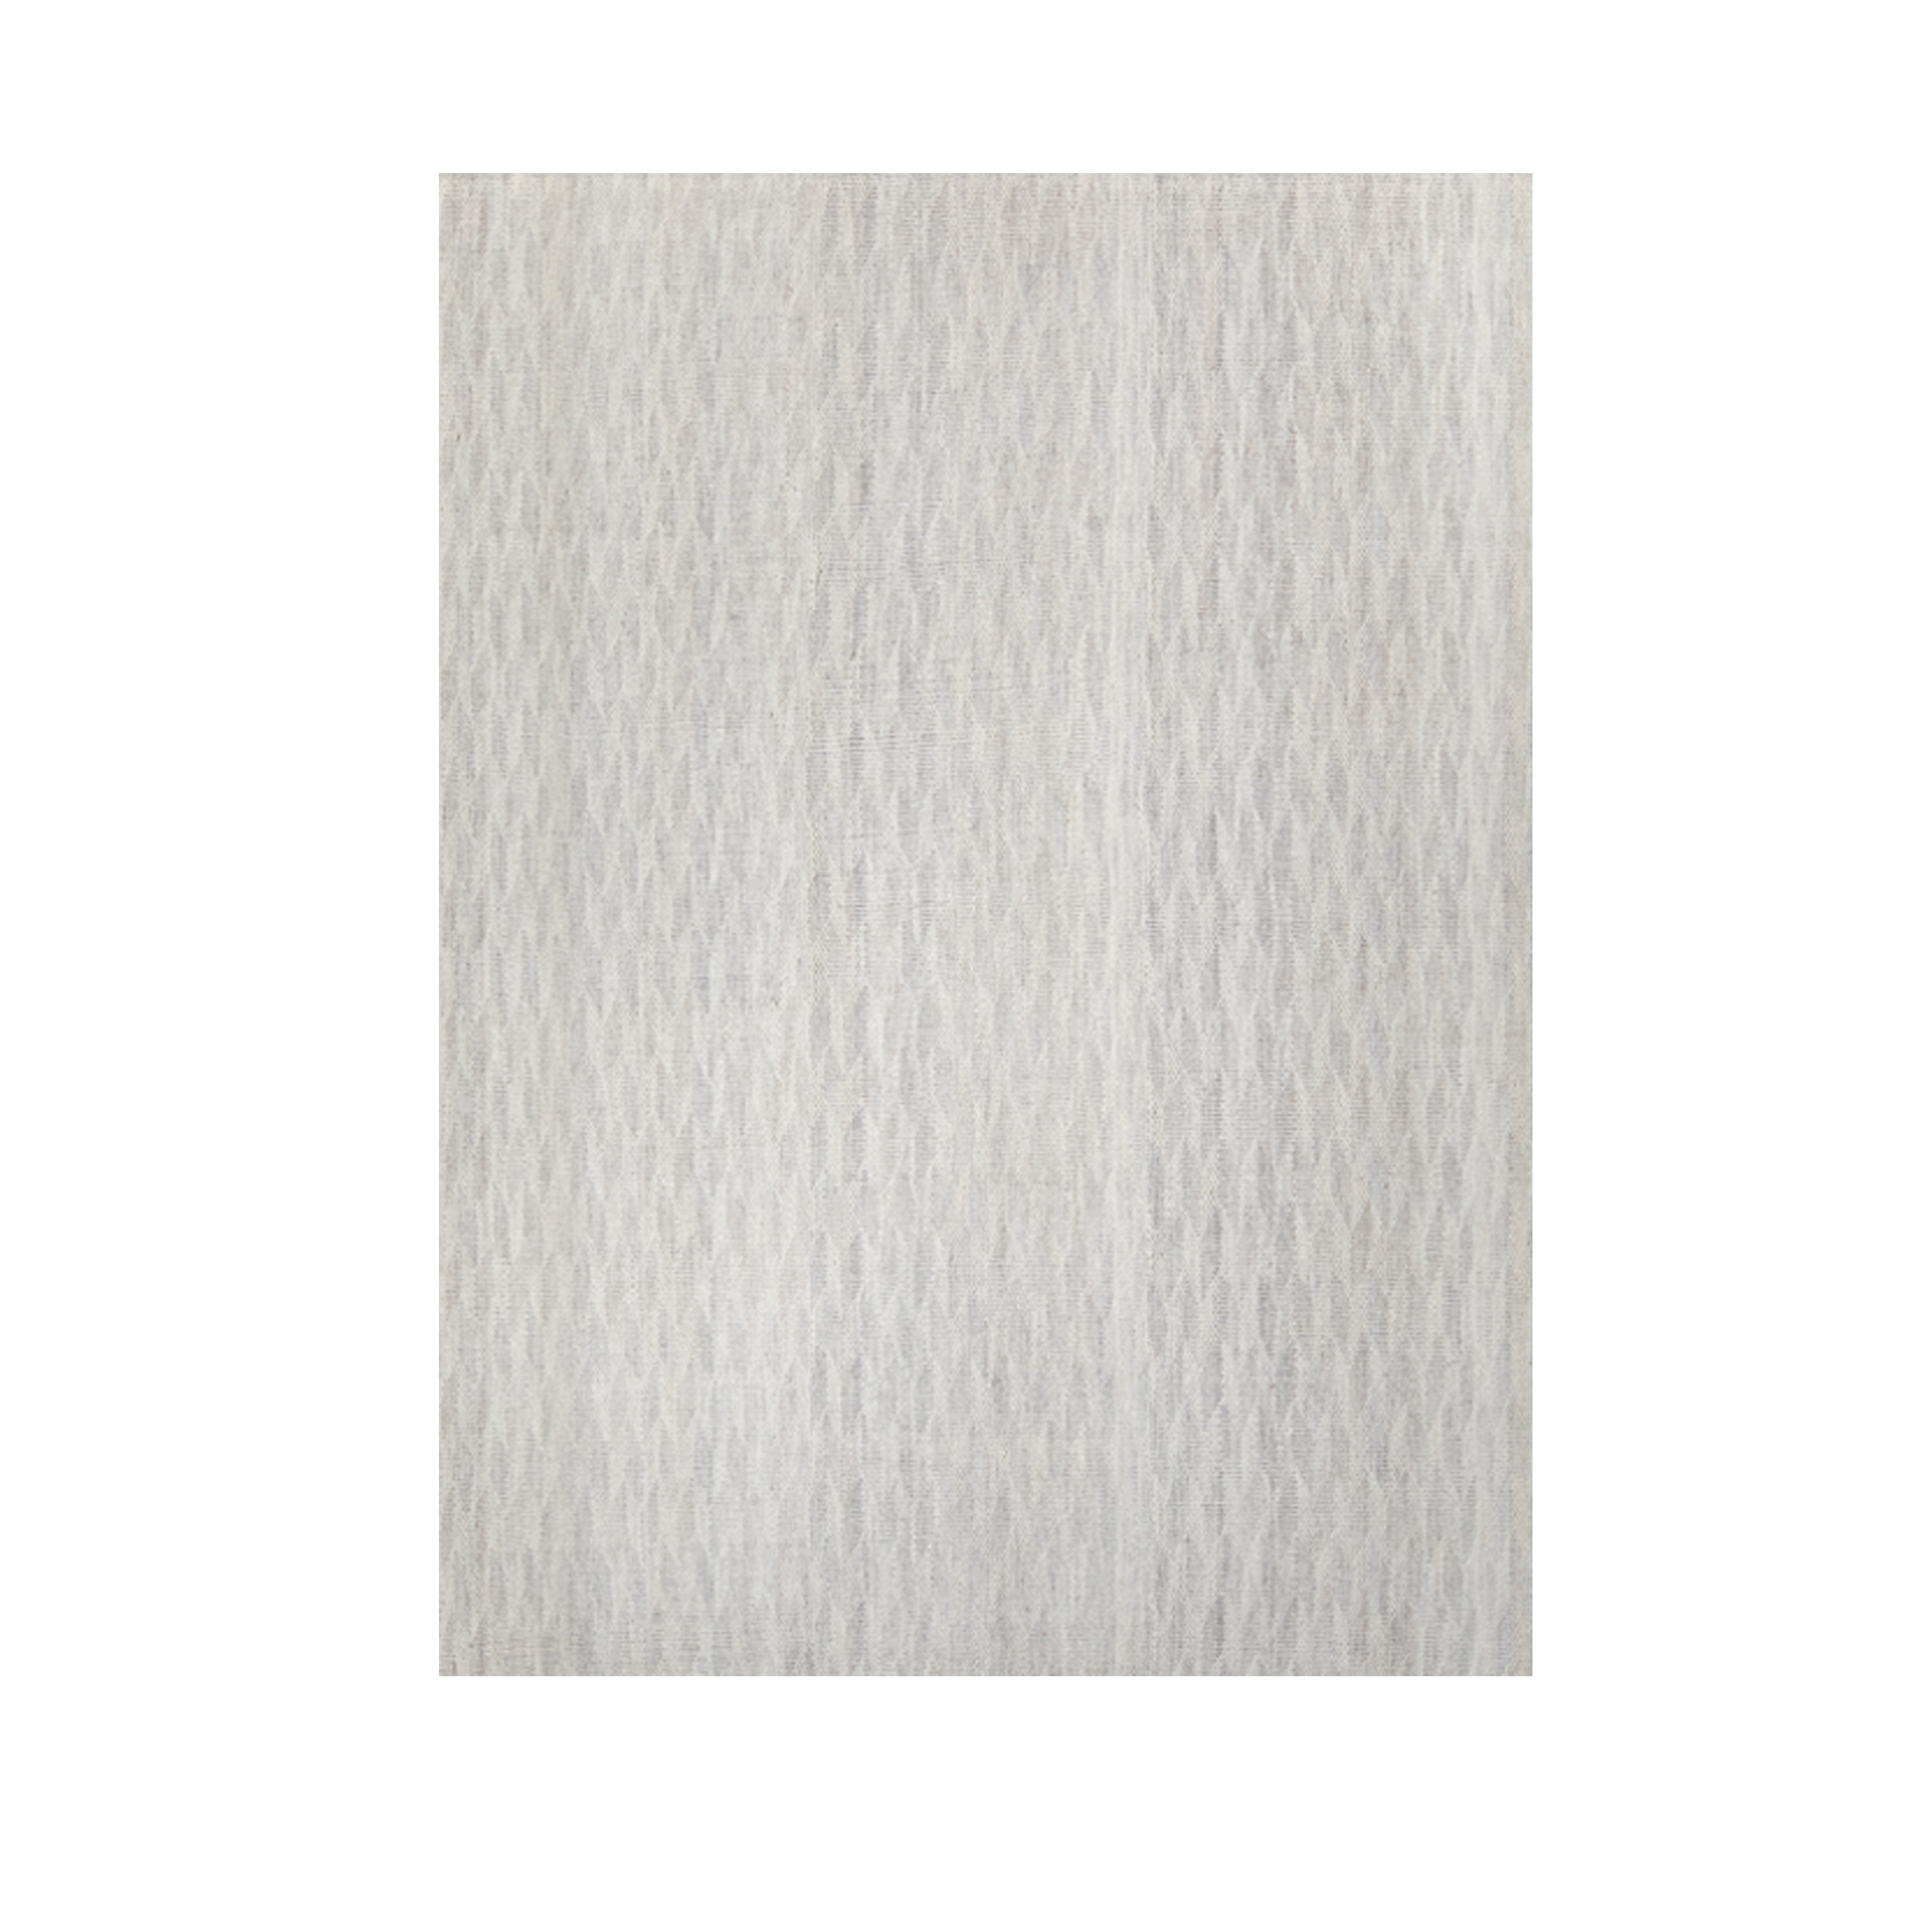 Spearhead rug is a flatweave inspired by the antique kilims native to the Persian culture. 